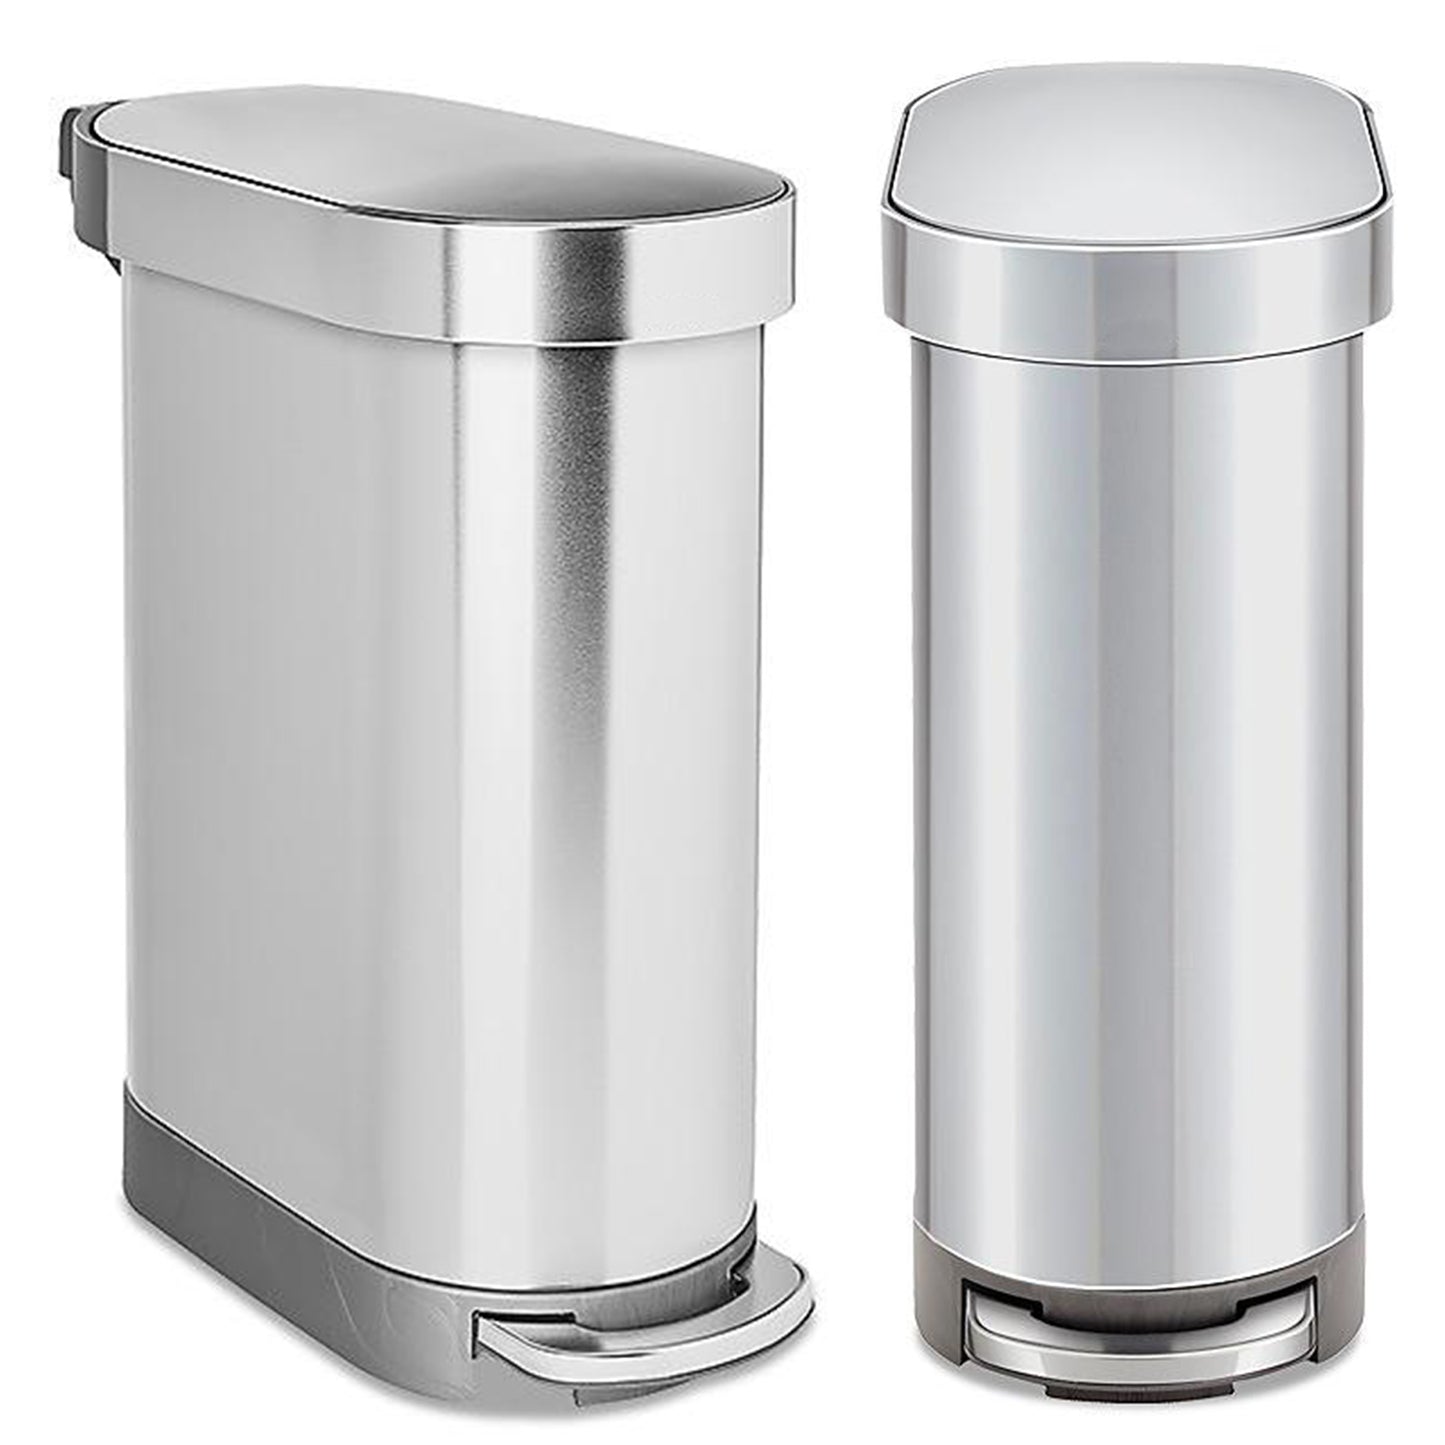 Stainless Steel Step Trash Cans